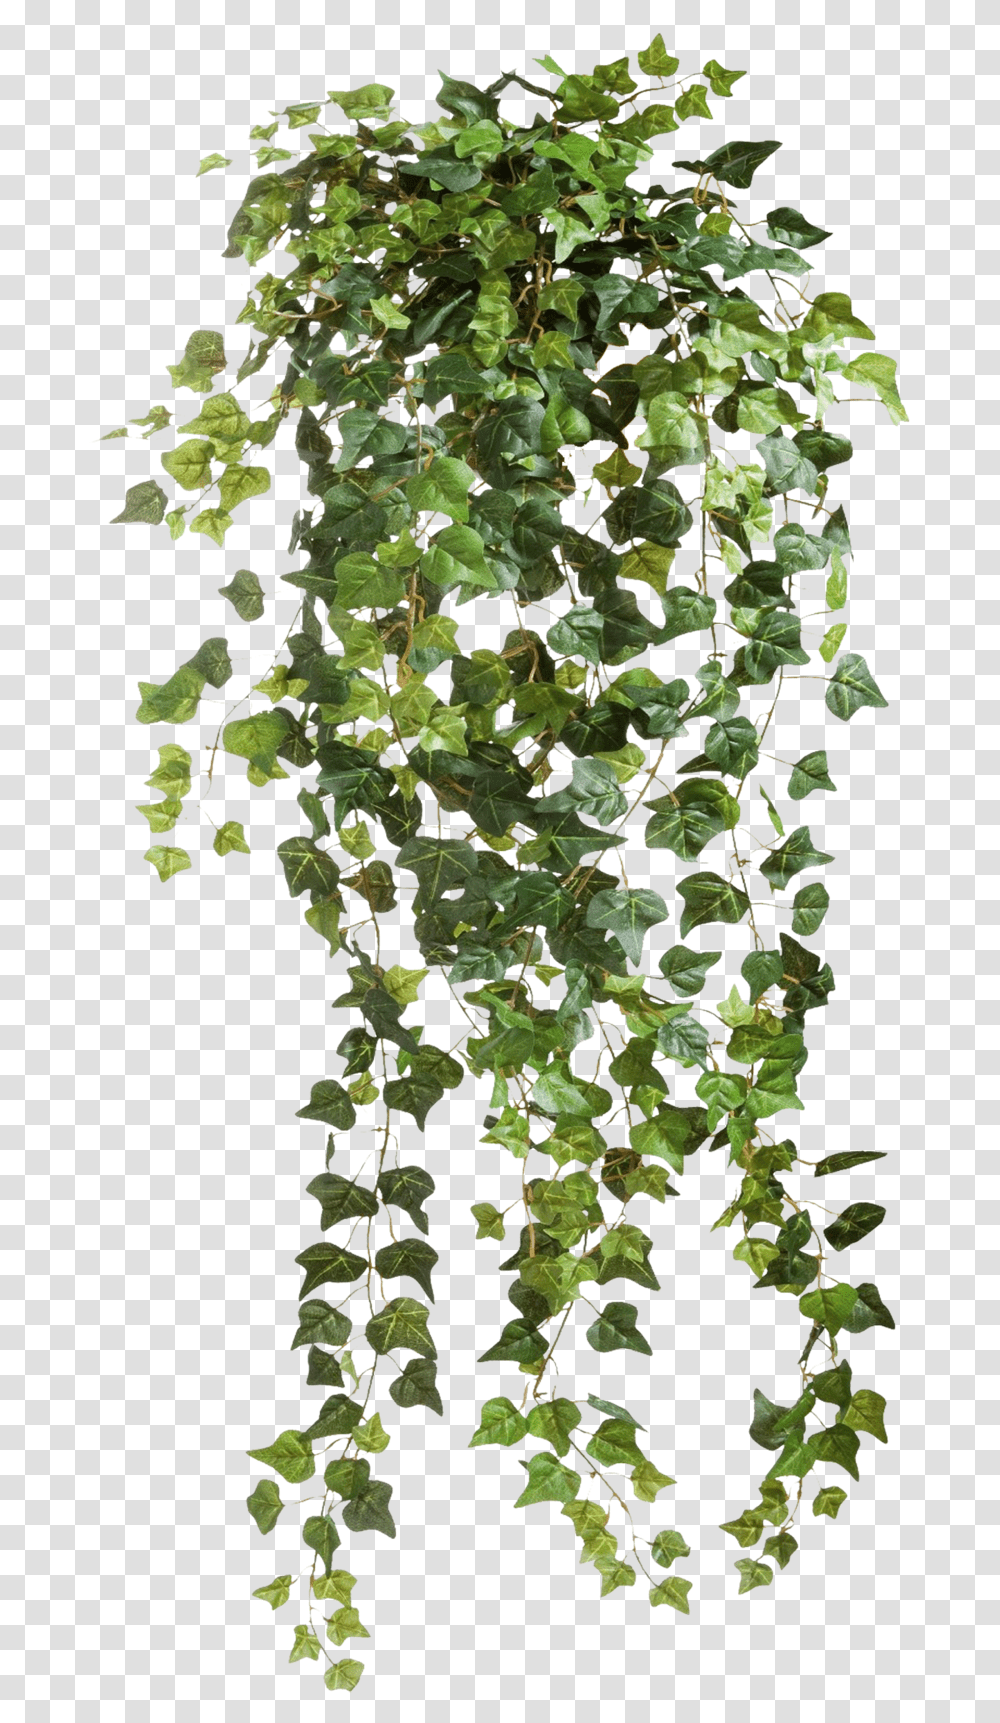 Planting Clipart Top View Picture 1918524 Tree, Military, Military Uniform, Camouflage Transparent Png